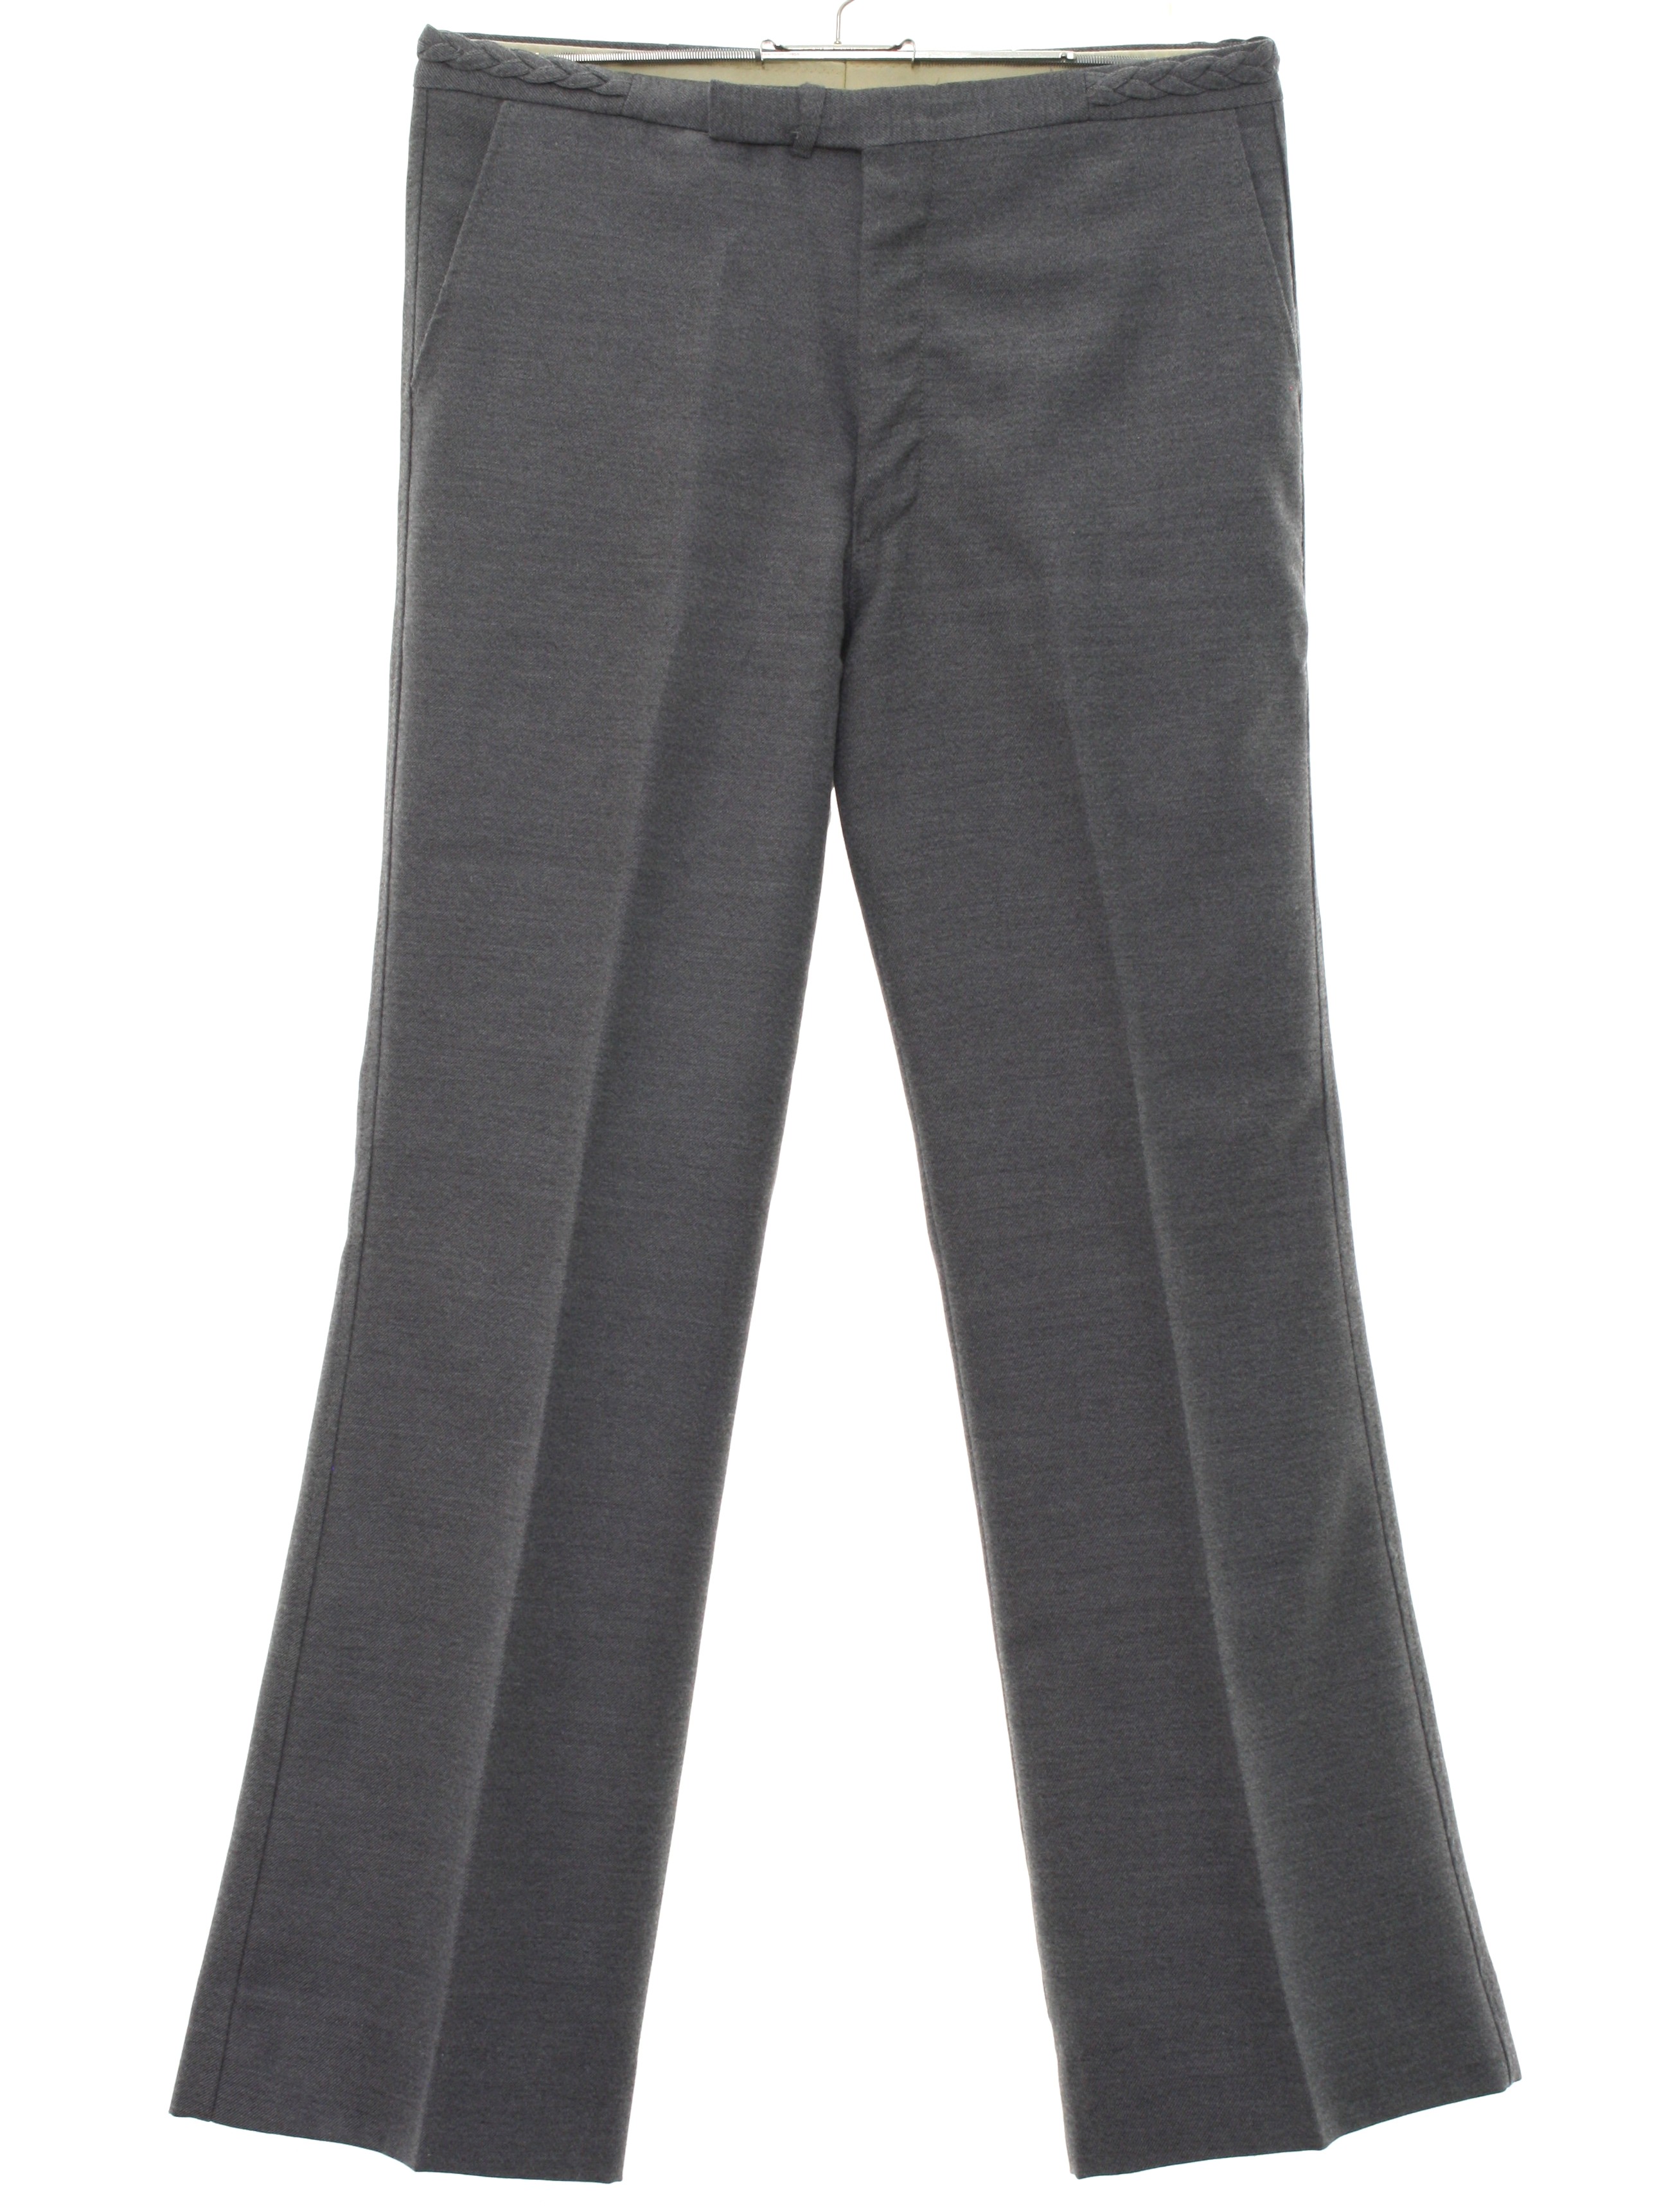 Vintage 70s Flared Pants / Flares: 70s -Outlooks- Mens gray heather ...